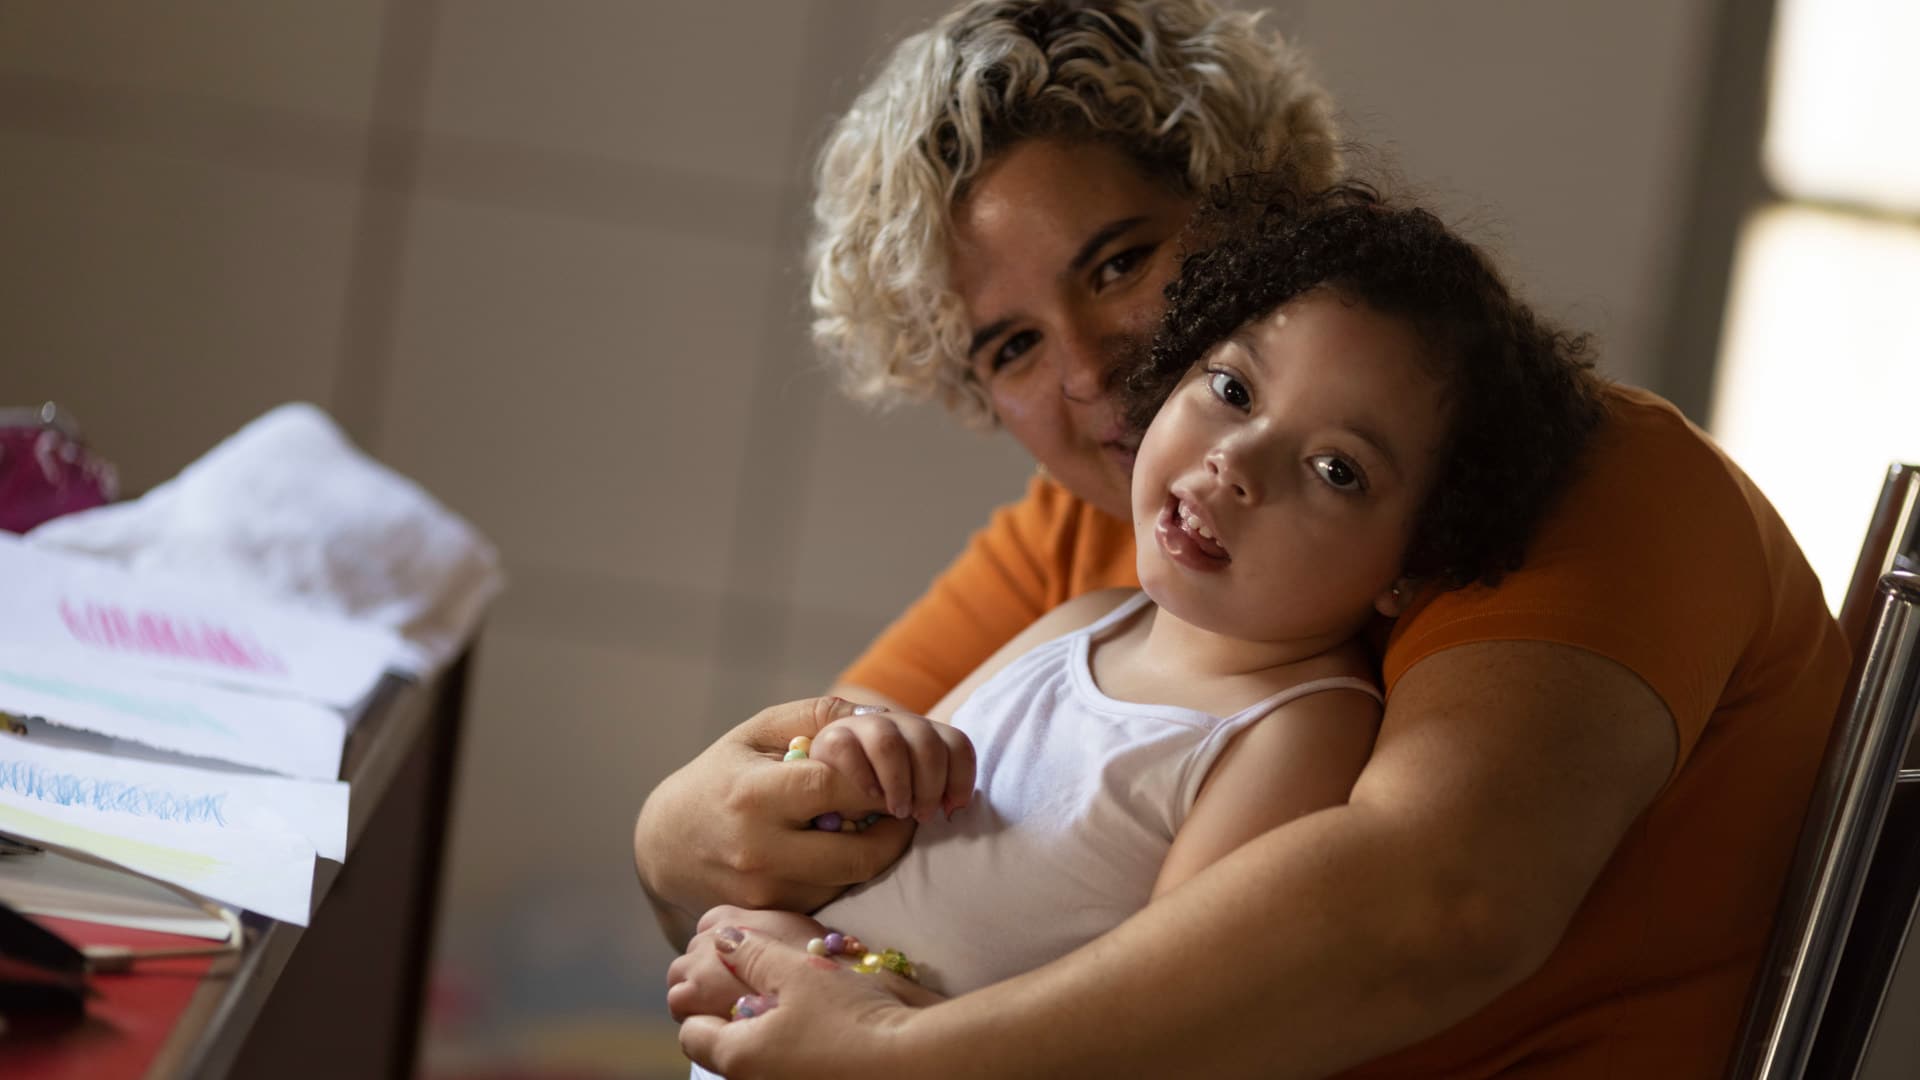 Rochelle dos Santos embraces her daughter, who was born with microcephaly in 2016 after dos Santos contracted Zika during her pregnancy in midwest Brazil. ALL PHOTOS BY UESLEI MARCELINO for UNDARK